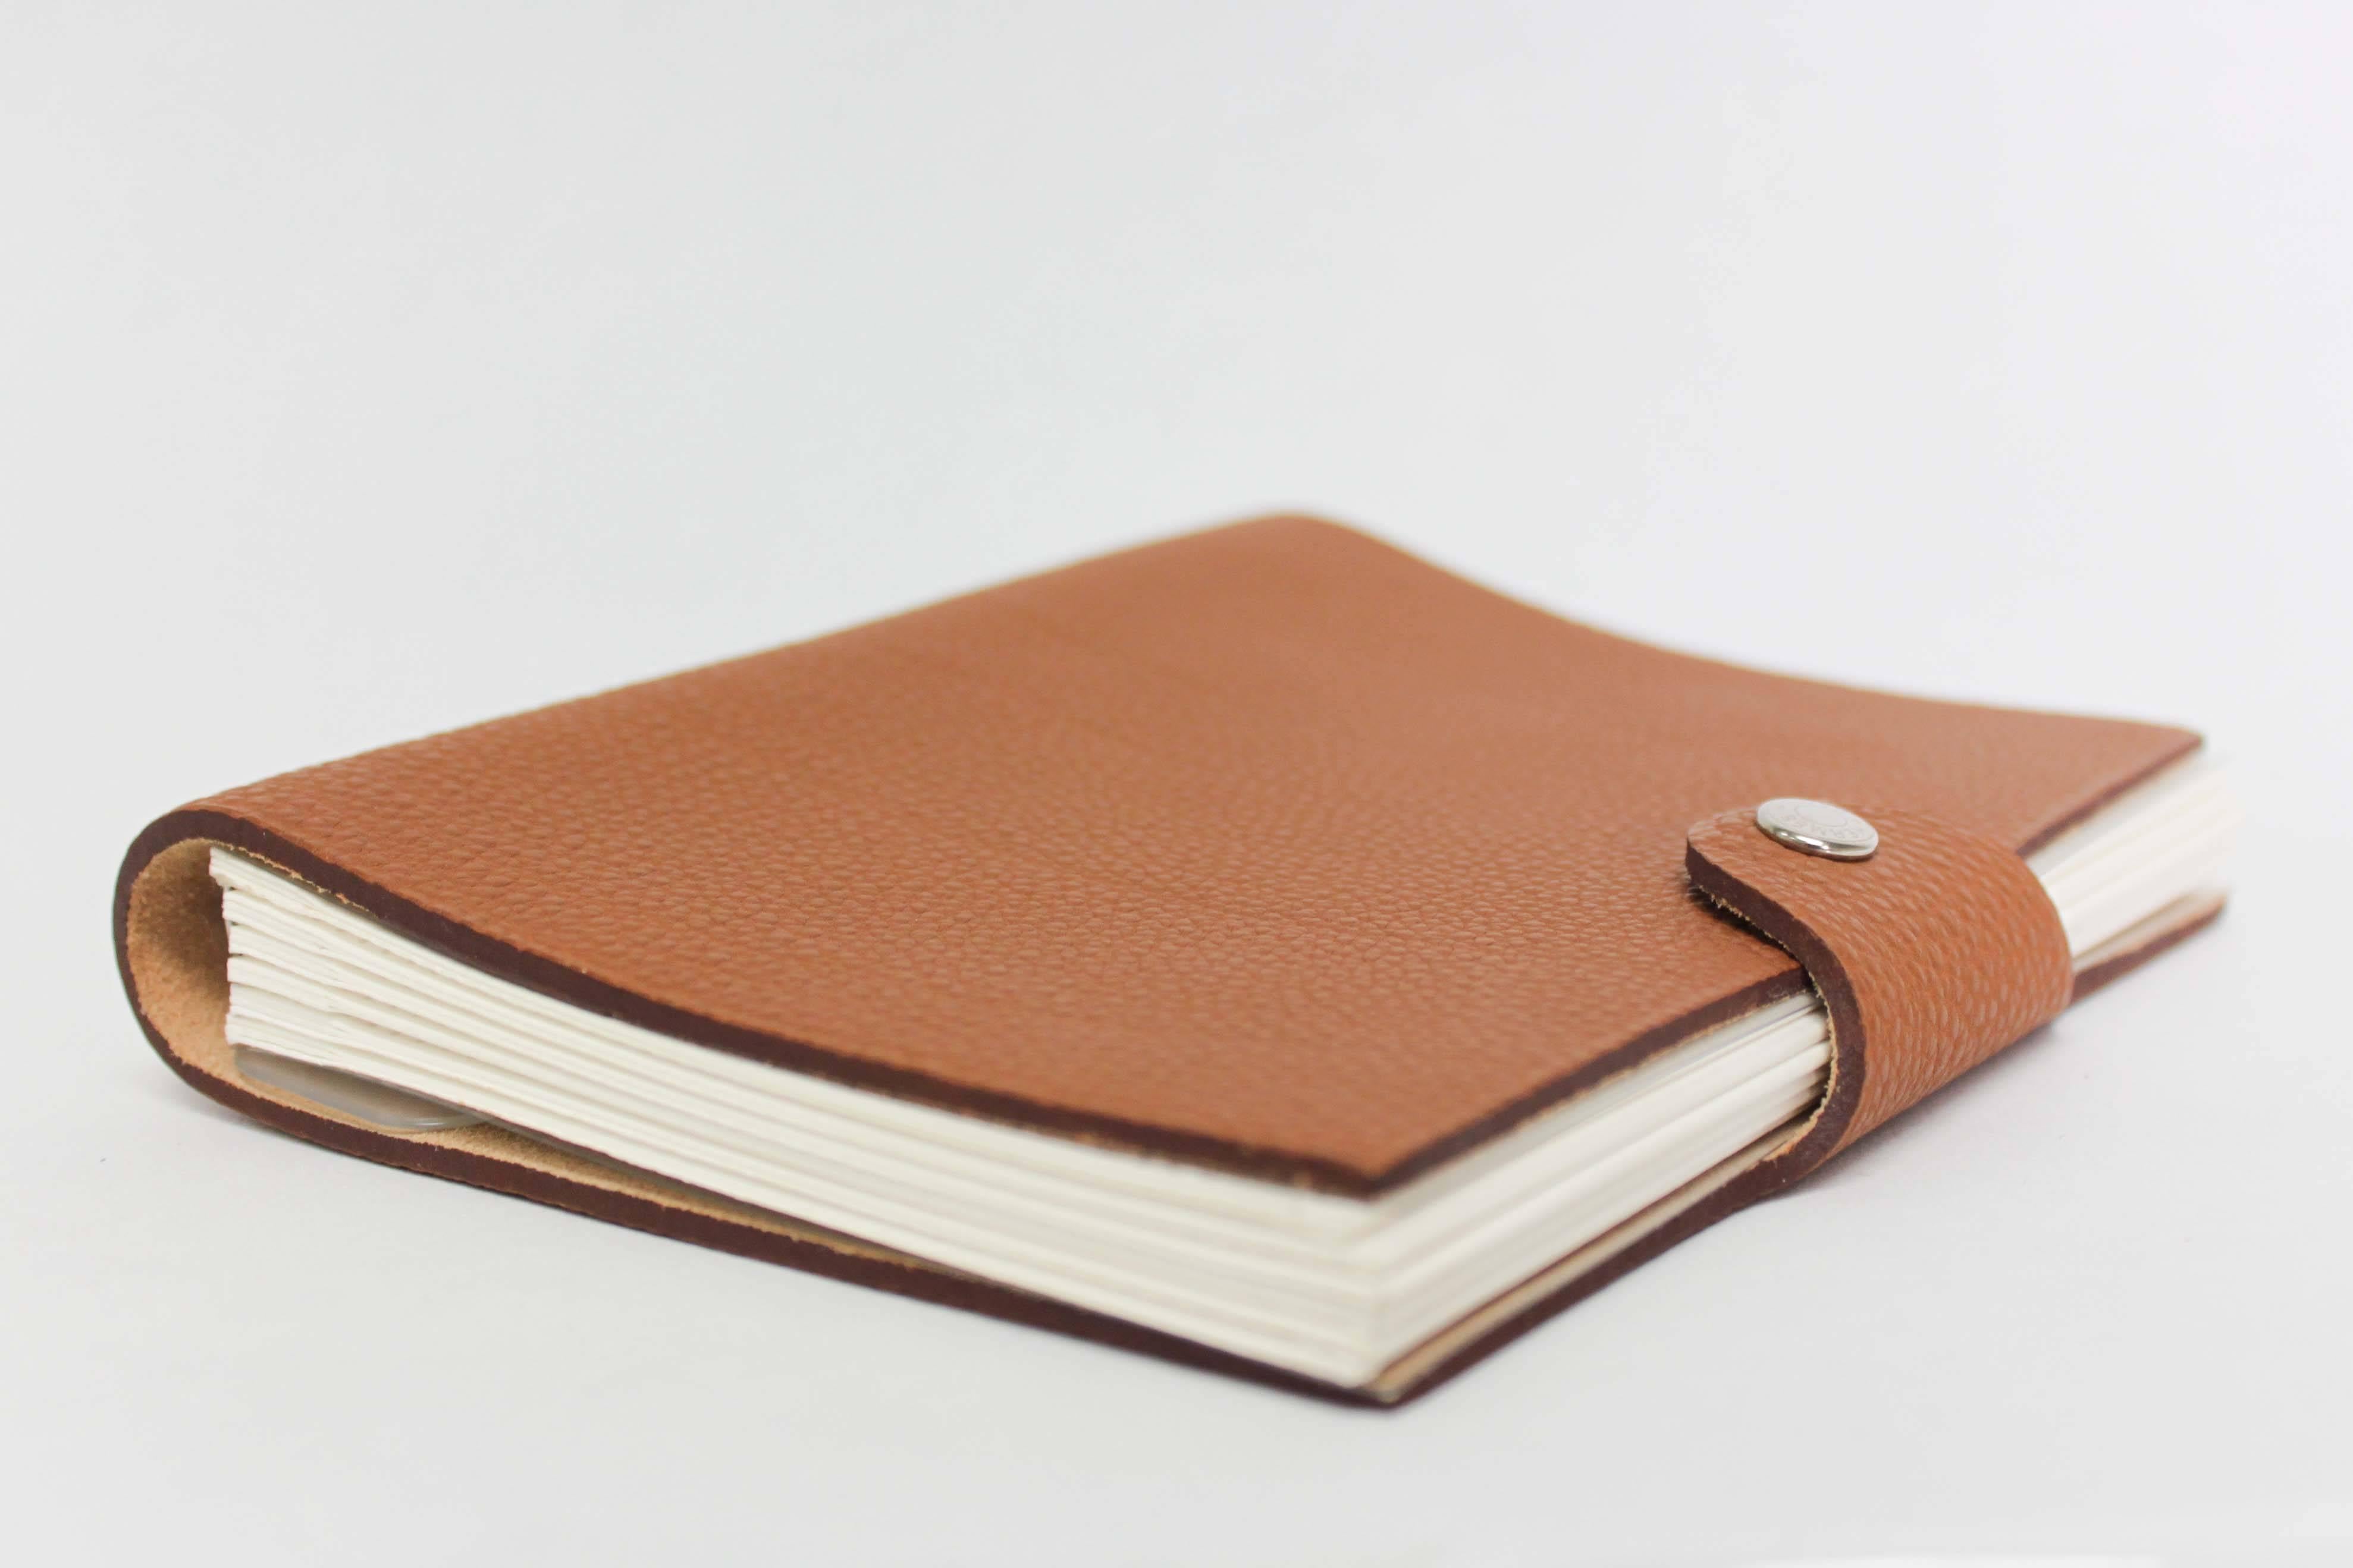 Togo leather photo album by Hermès. Excellent original condition, marked with a square and 